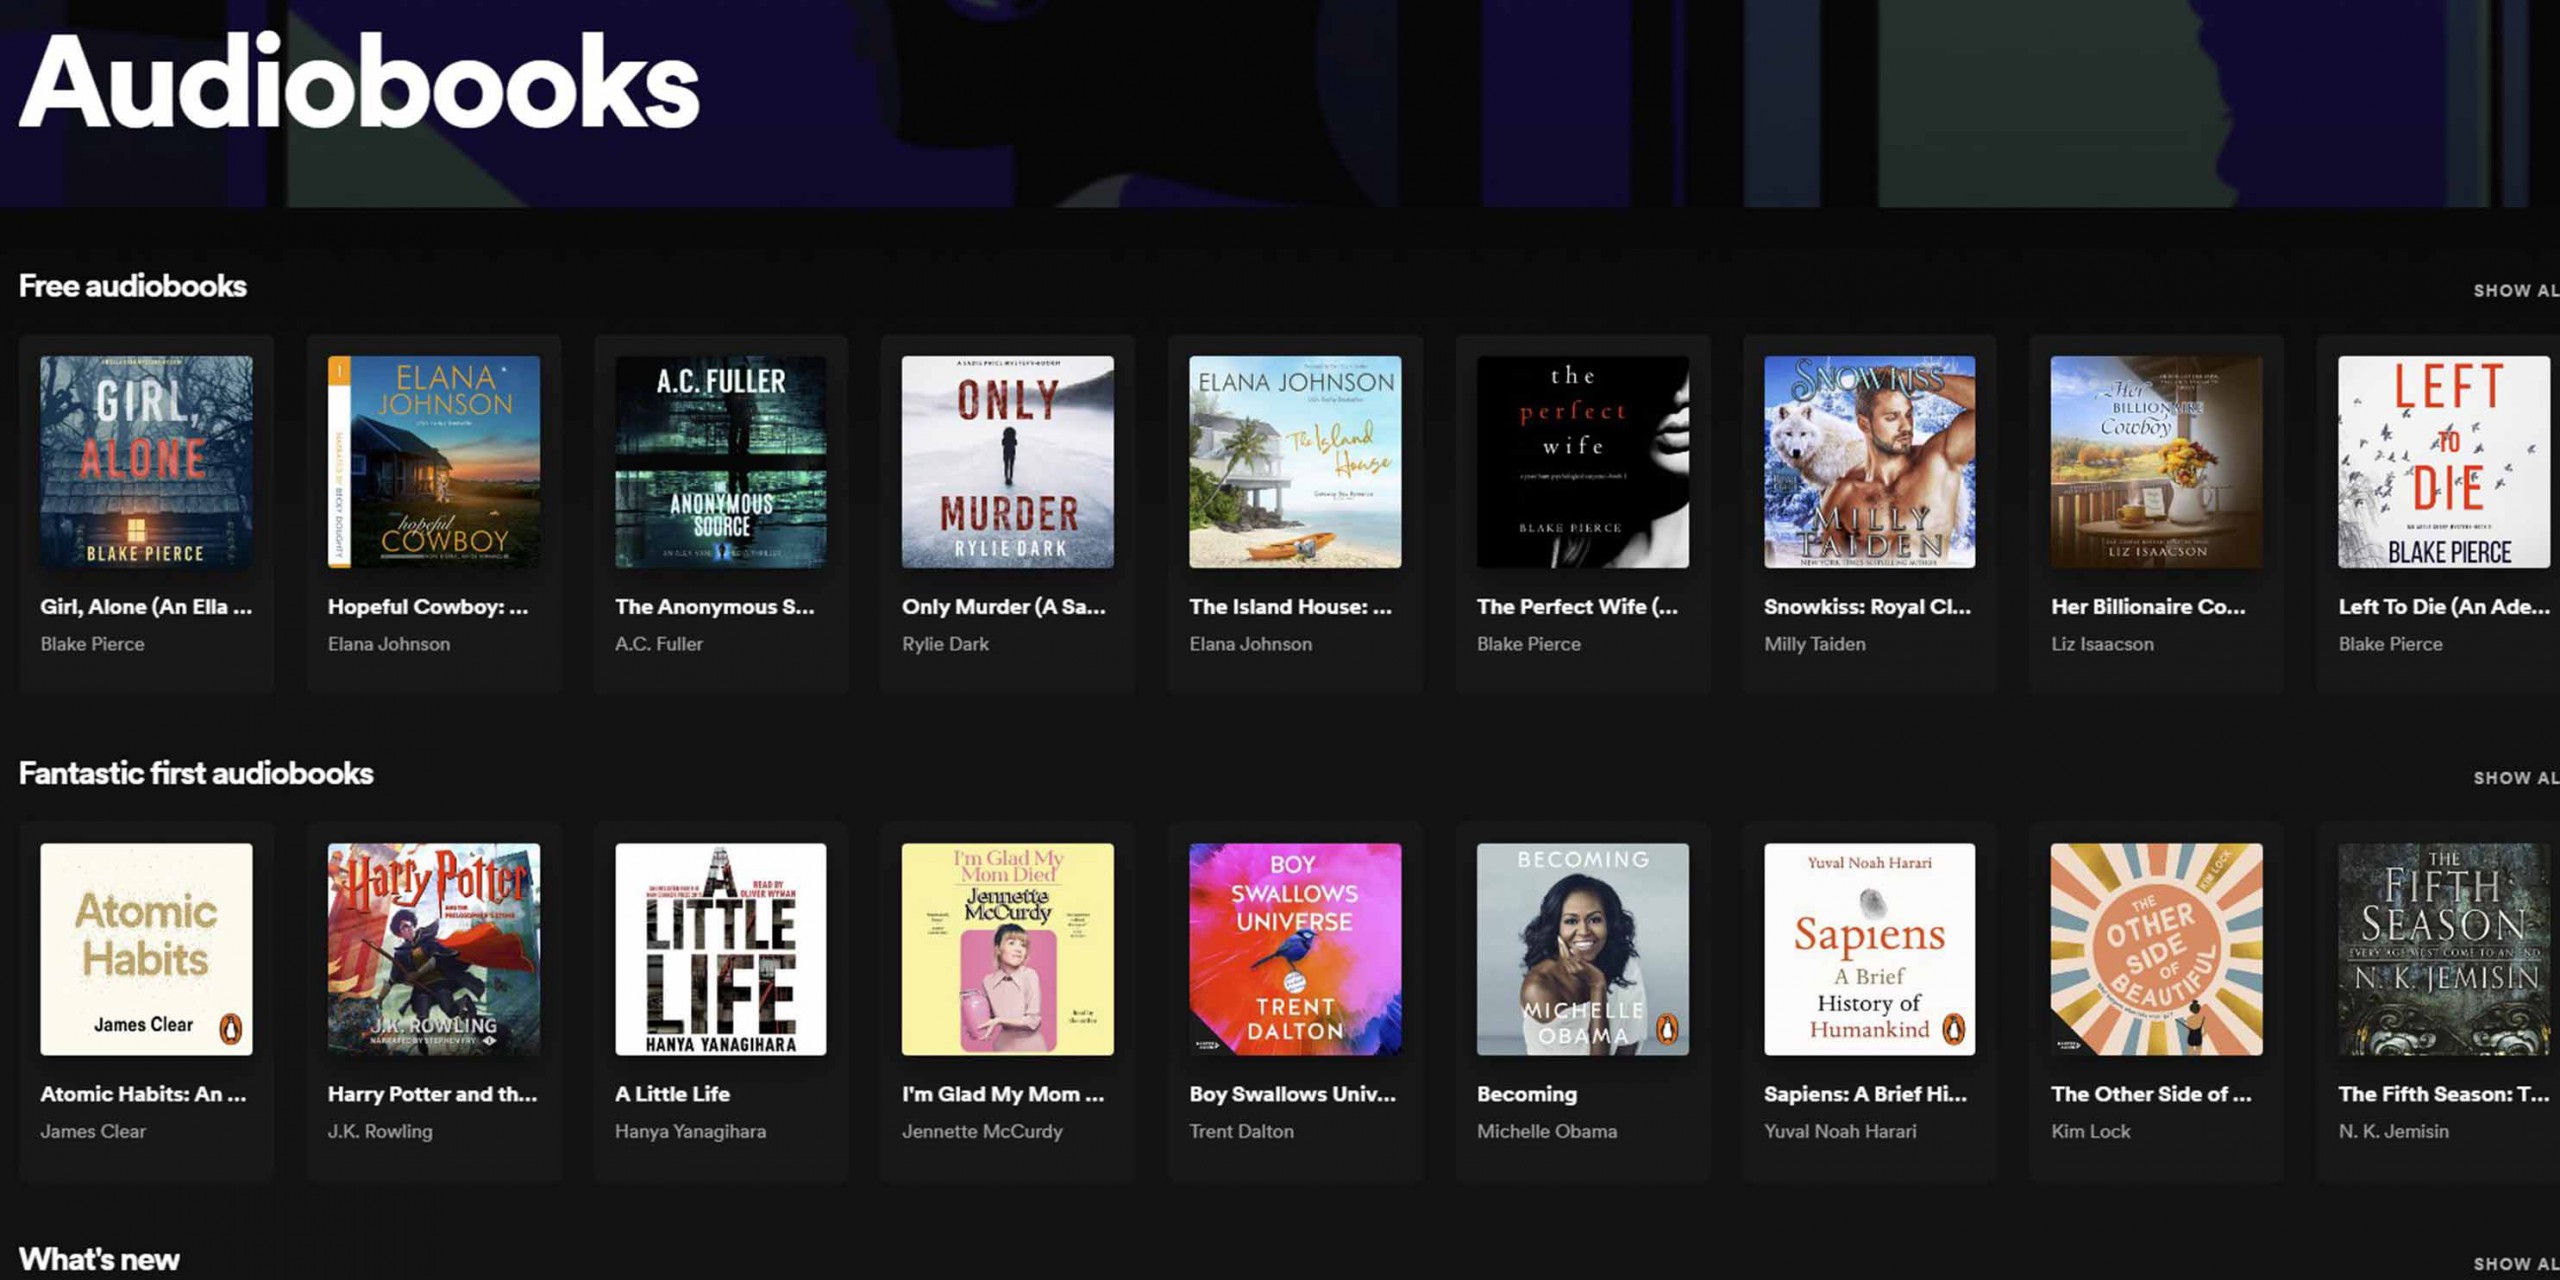 Image of a screenshot from the Spotify app, showing a selection of audiobooks available on the platform. The audiobooks include titles such as 'Harry Potter and the Philosopher's Stone', Atomic Habits by James Clear, among others."